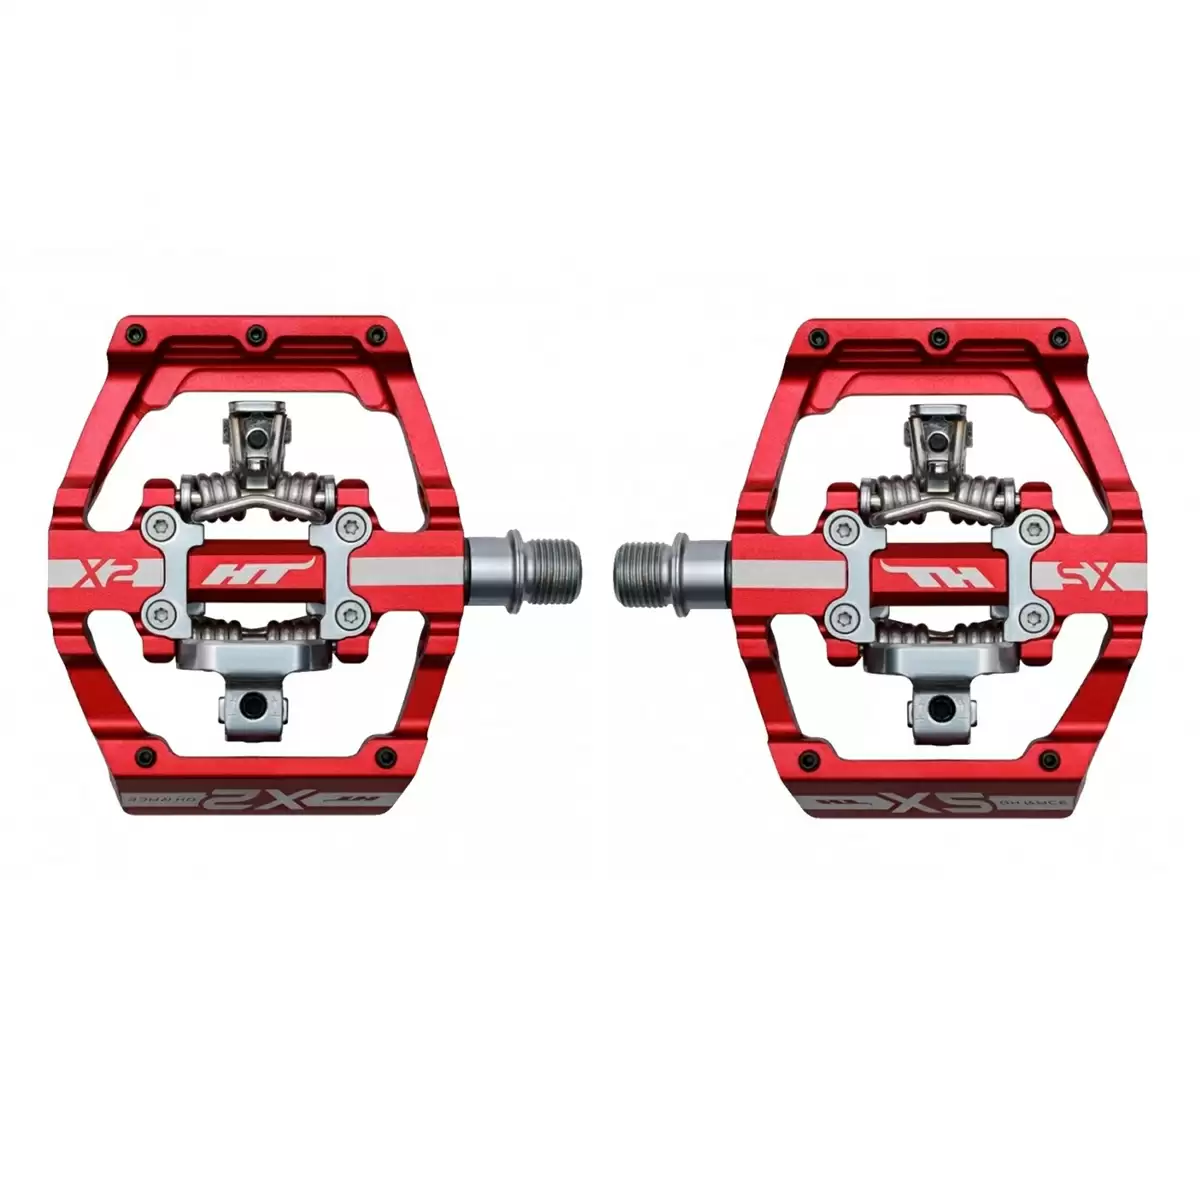 Pair DH X2 clip pedals red - image